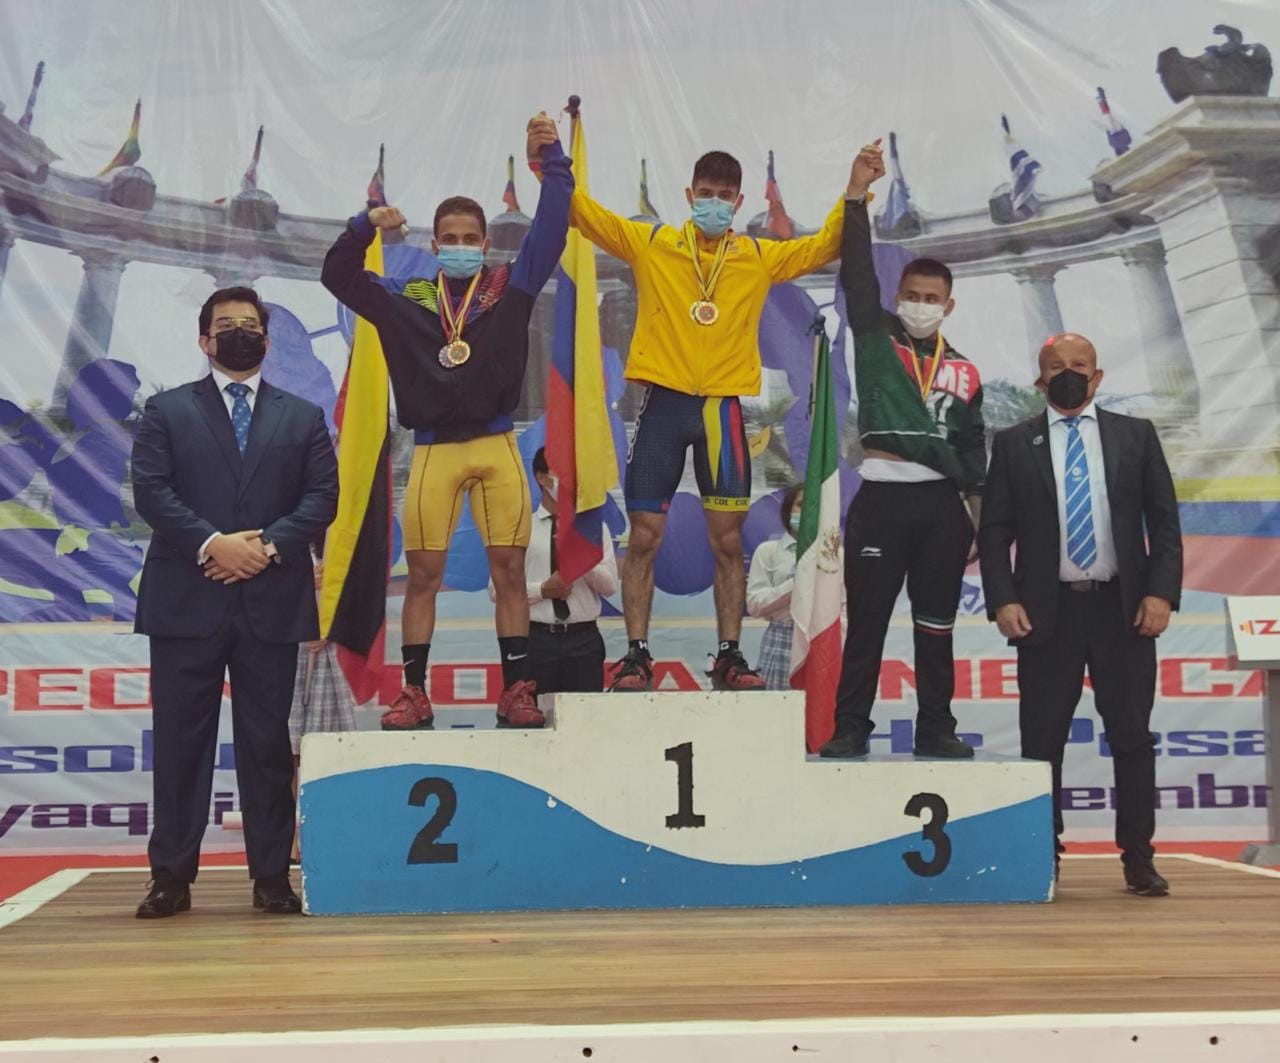 The podium for the men's 55kg category at the Pan American Weightlifting Championships ©PAWF 